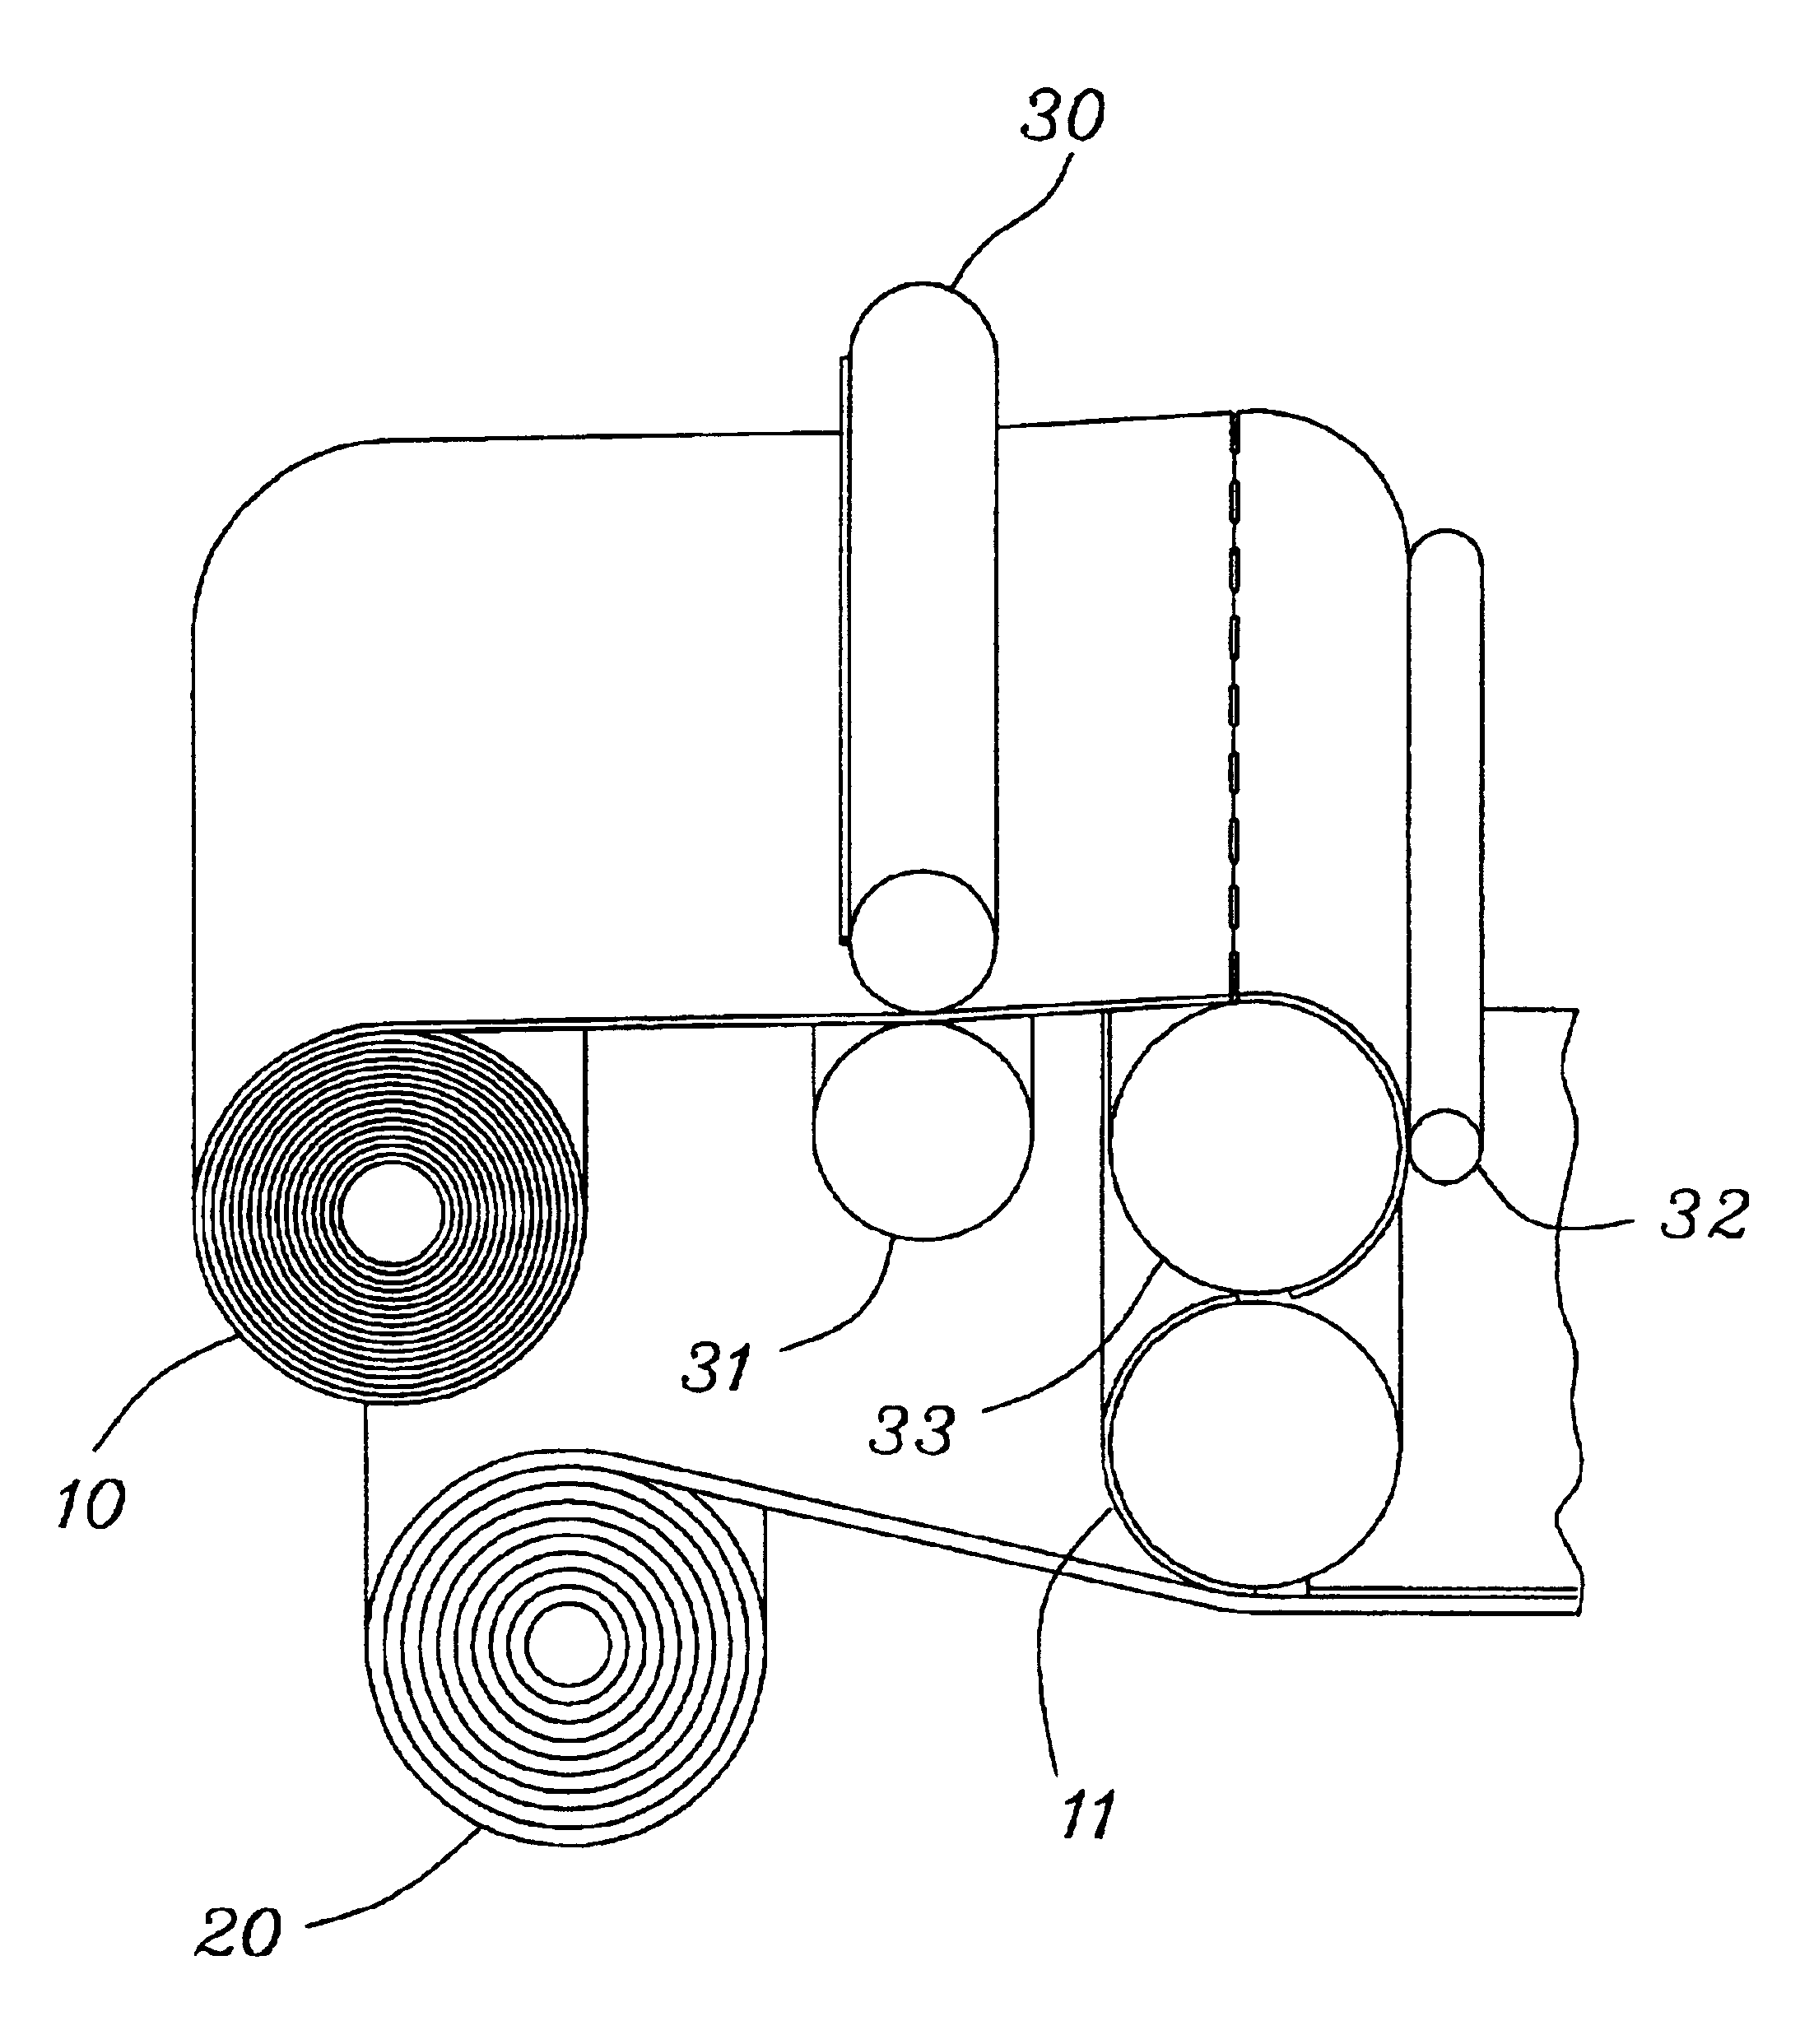 Continuous method of providing individual sheets from a continuous web